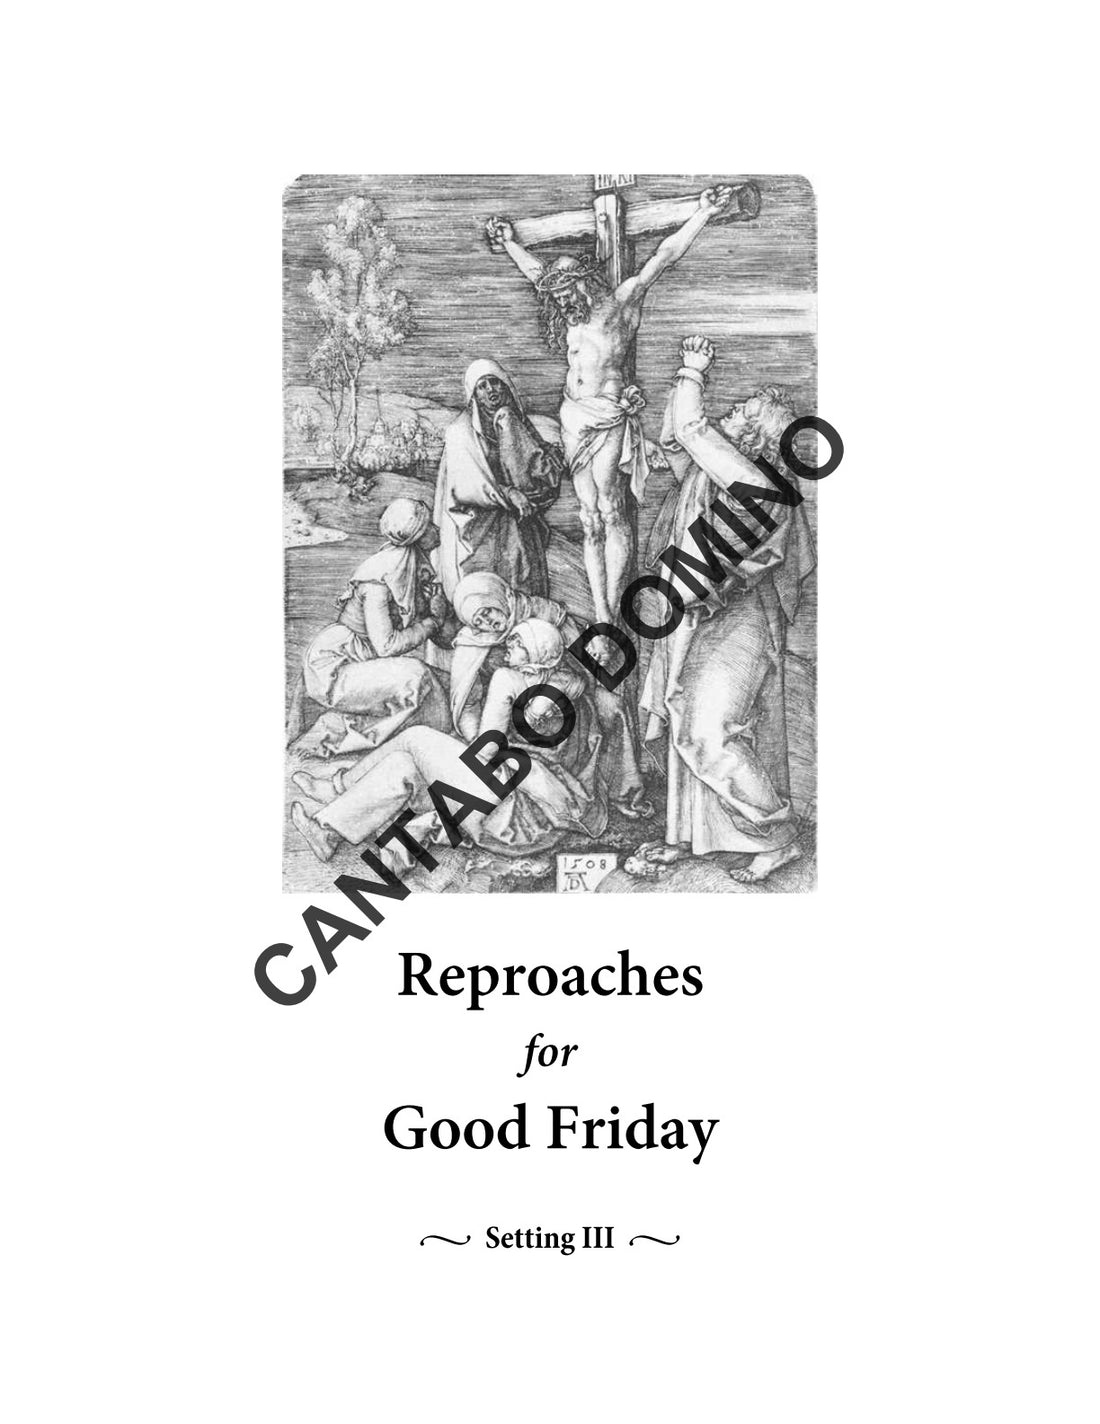 Reproaches for Good Friday (Setting III)